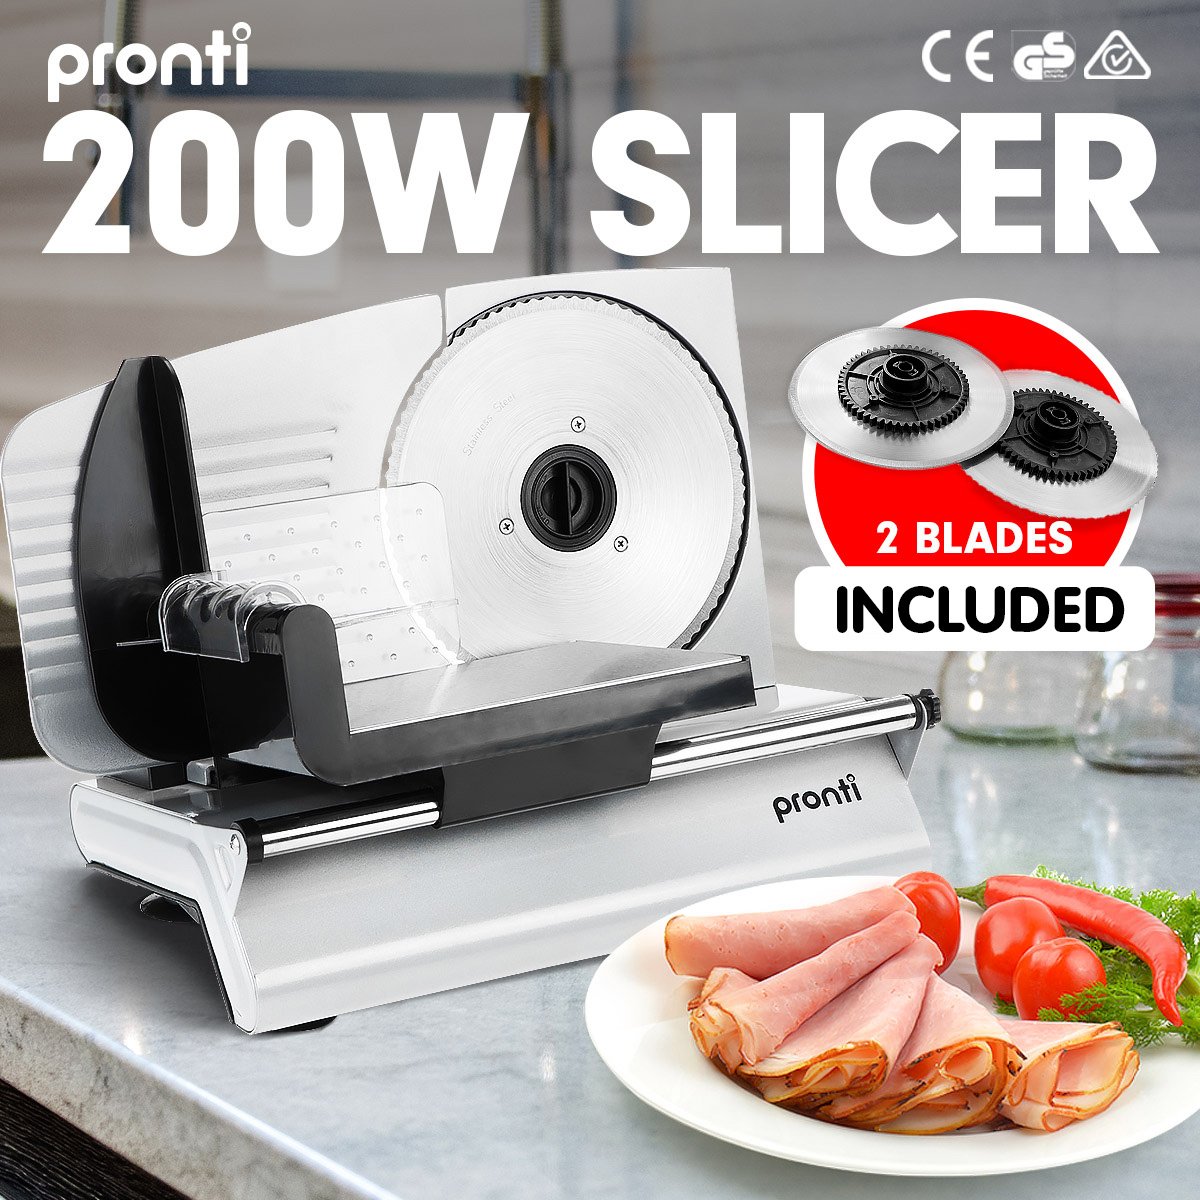 Deli and Food Electric Meat Slicer 200W Blades Processor